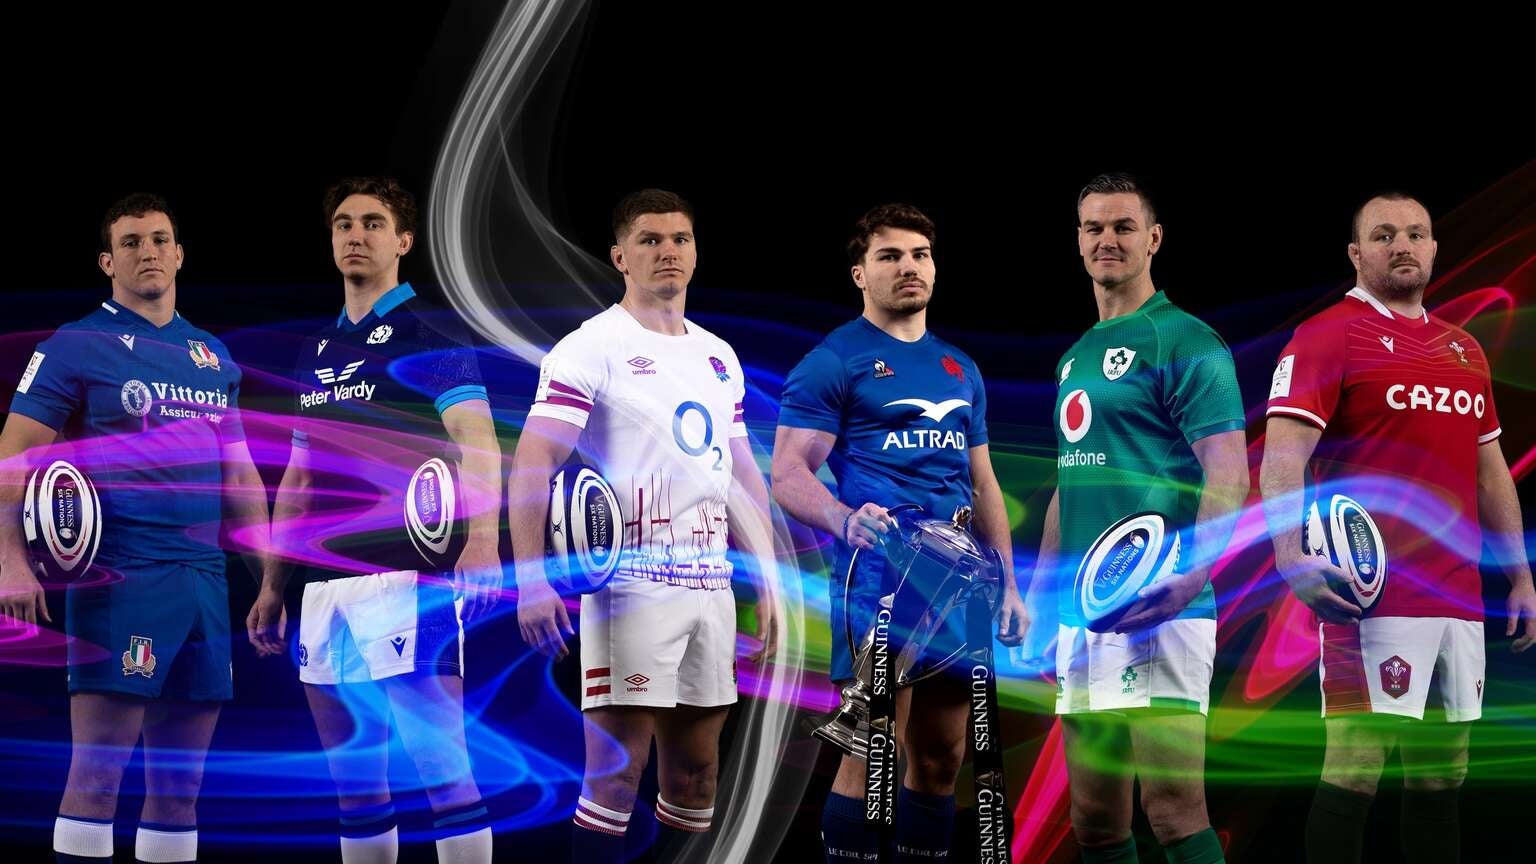 How to Watch 2023 Six Nations Rugby Championship Live Online Without